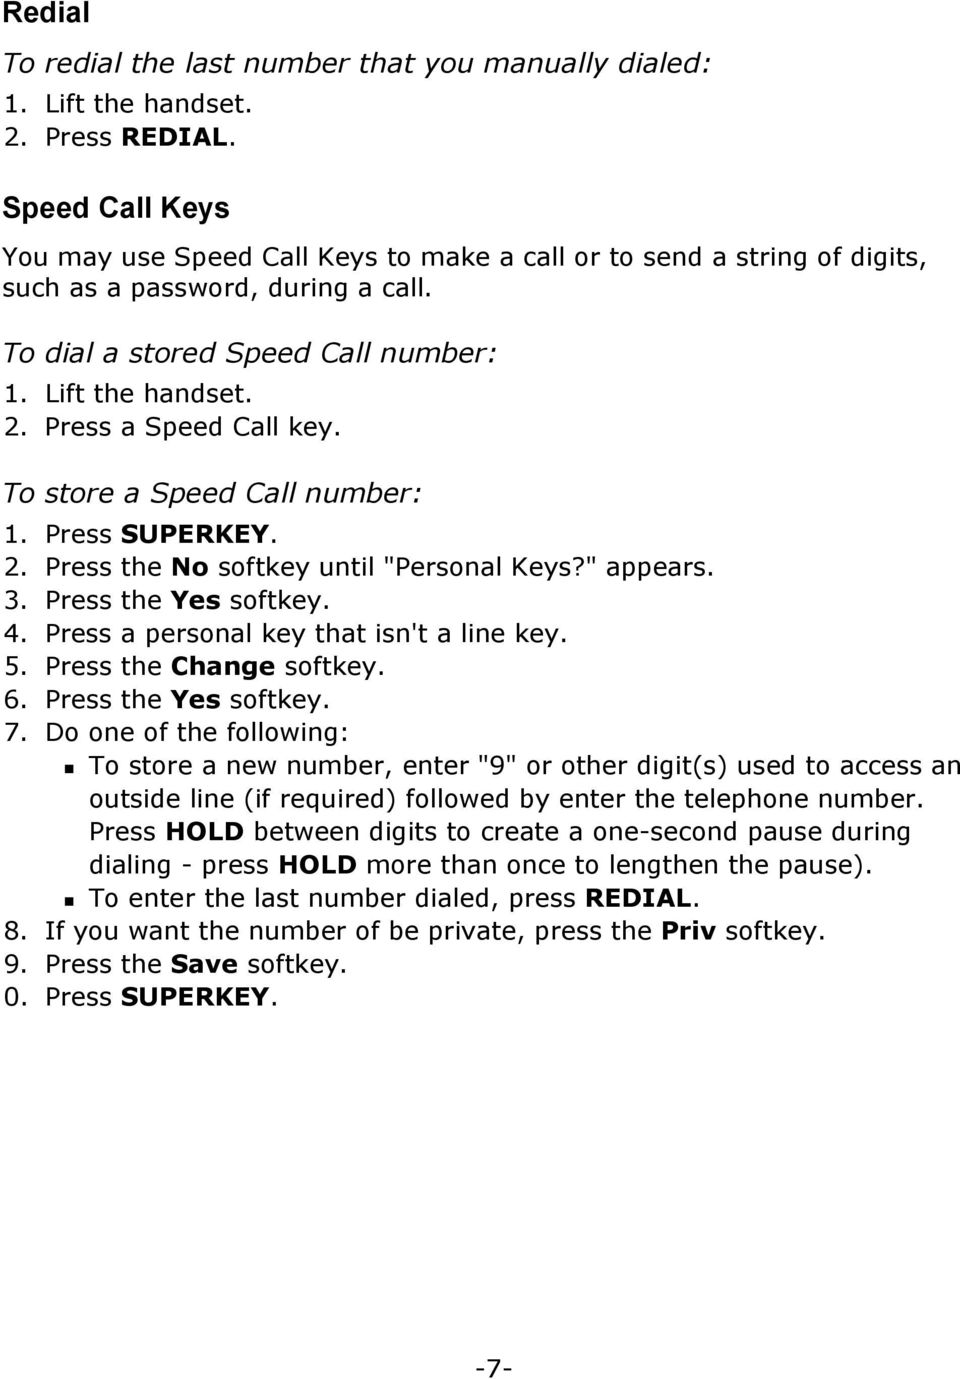 Press a Speed Call key. To store a Speed Call number: 2. Press the No softkey until "Personal Keys?" appears. 3. Press the Yes softkey. 4. Press a personal key that isn't a line key. 5.